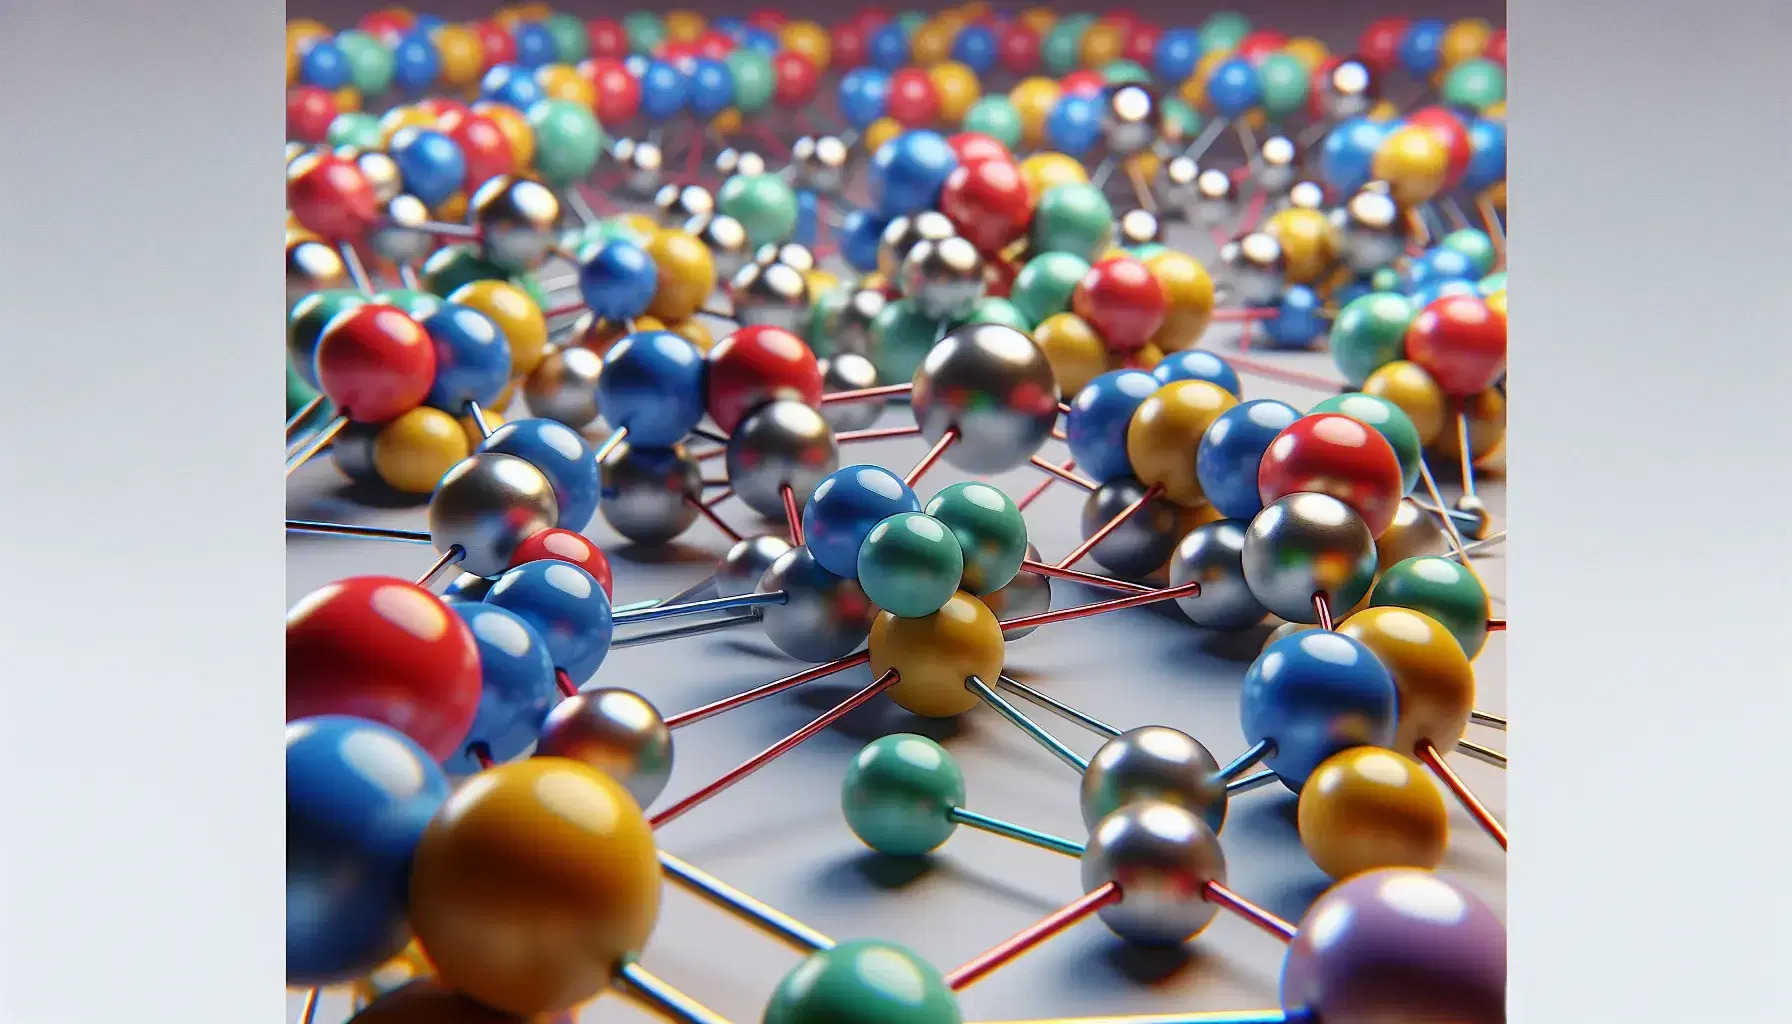 Colorful atomic models with pins simulating chemical bonds on a neutral background, highlighting the molecular structure in formation.